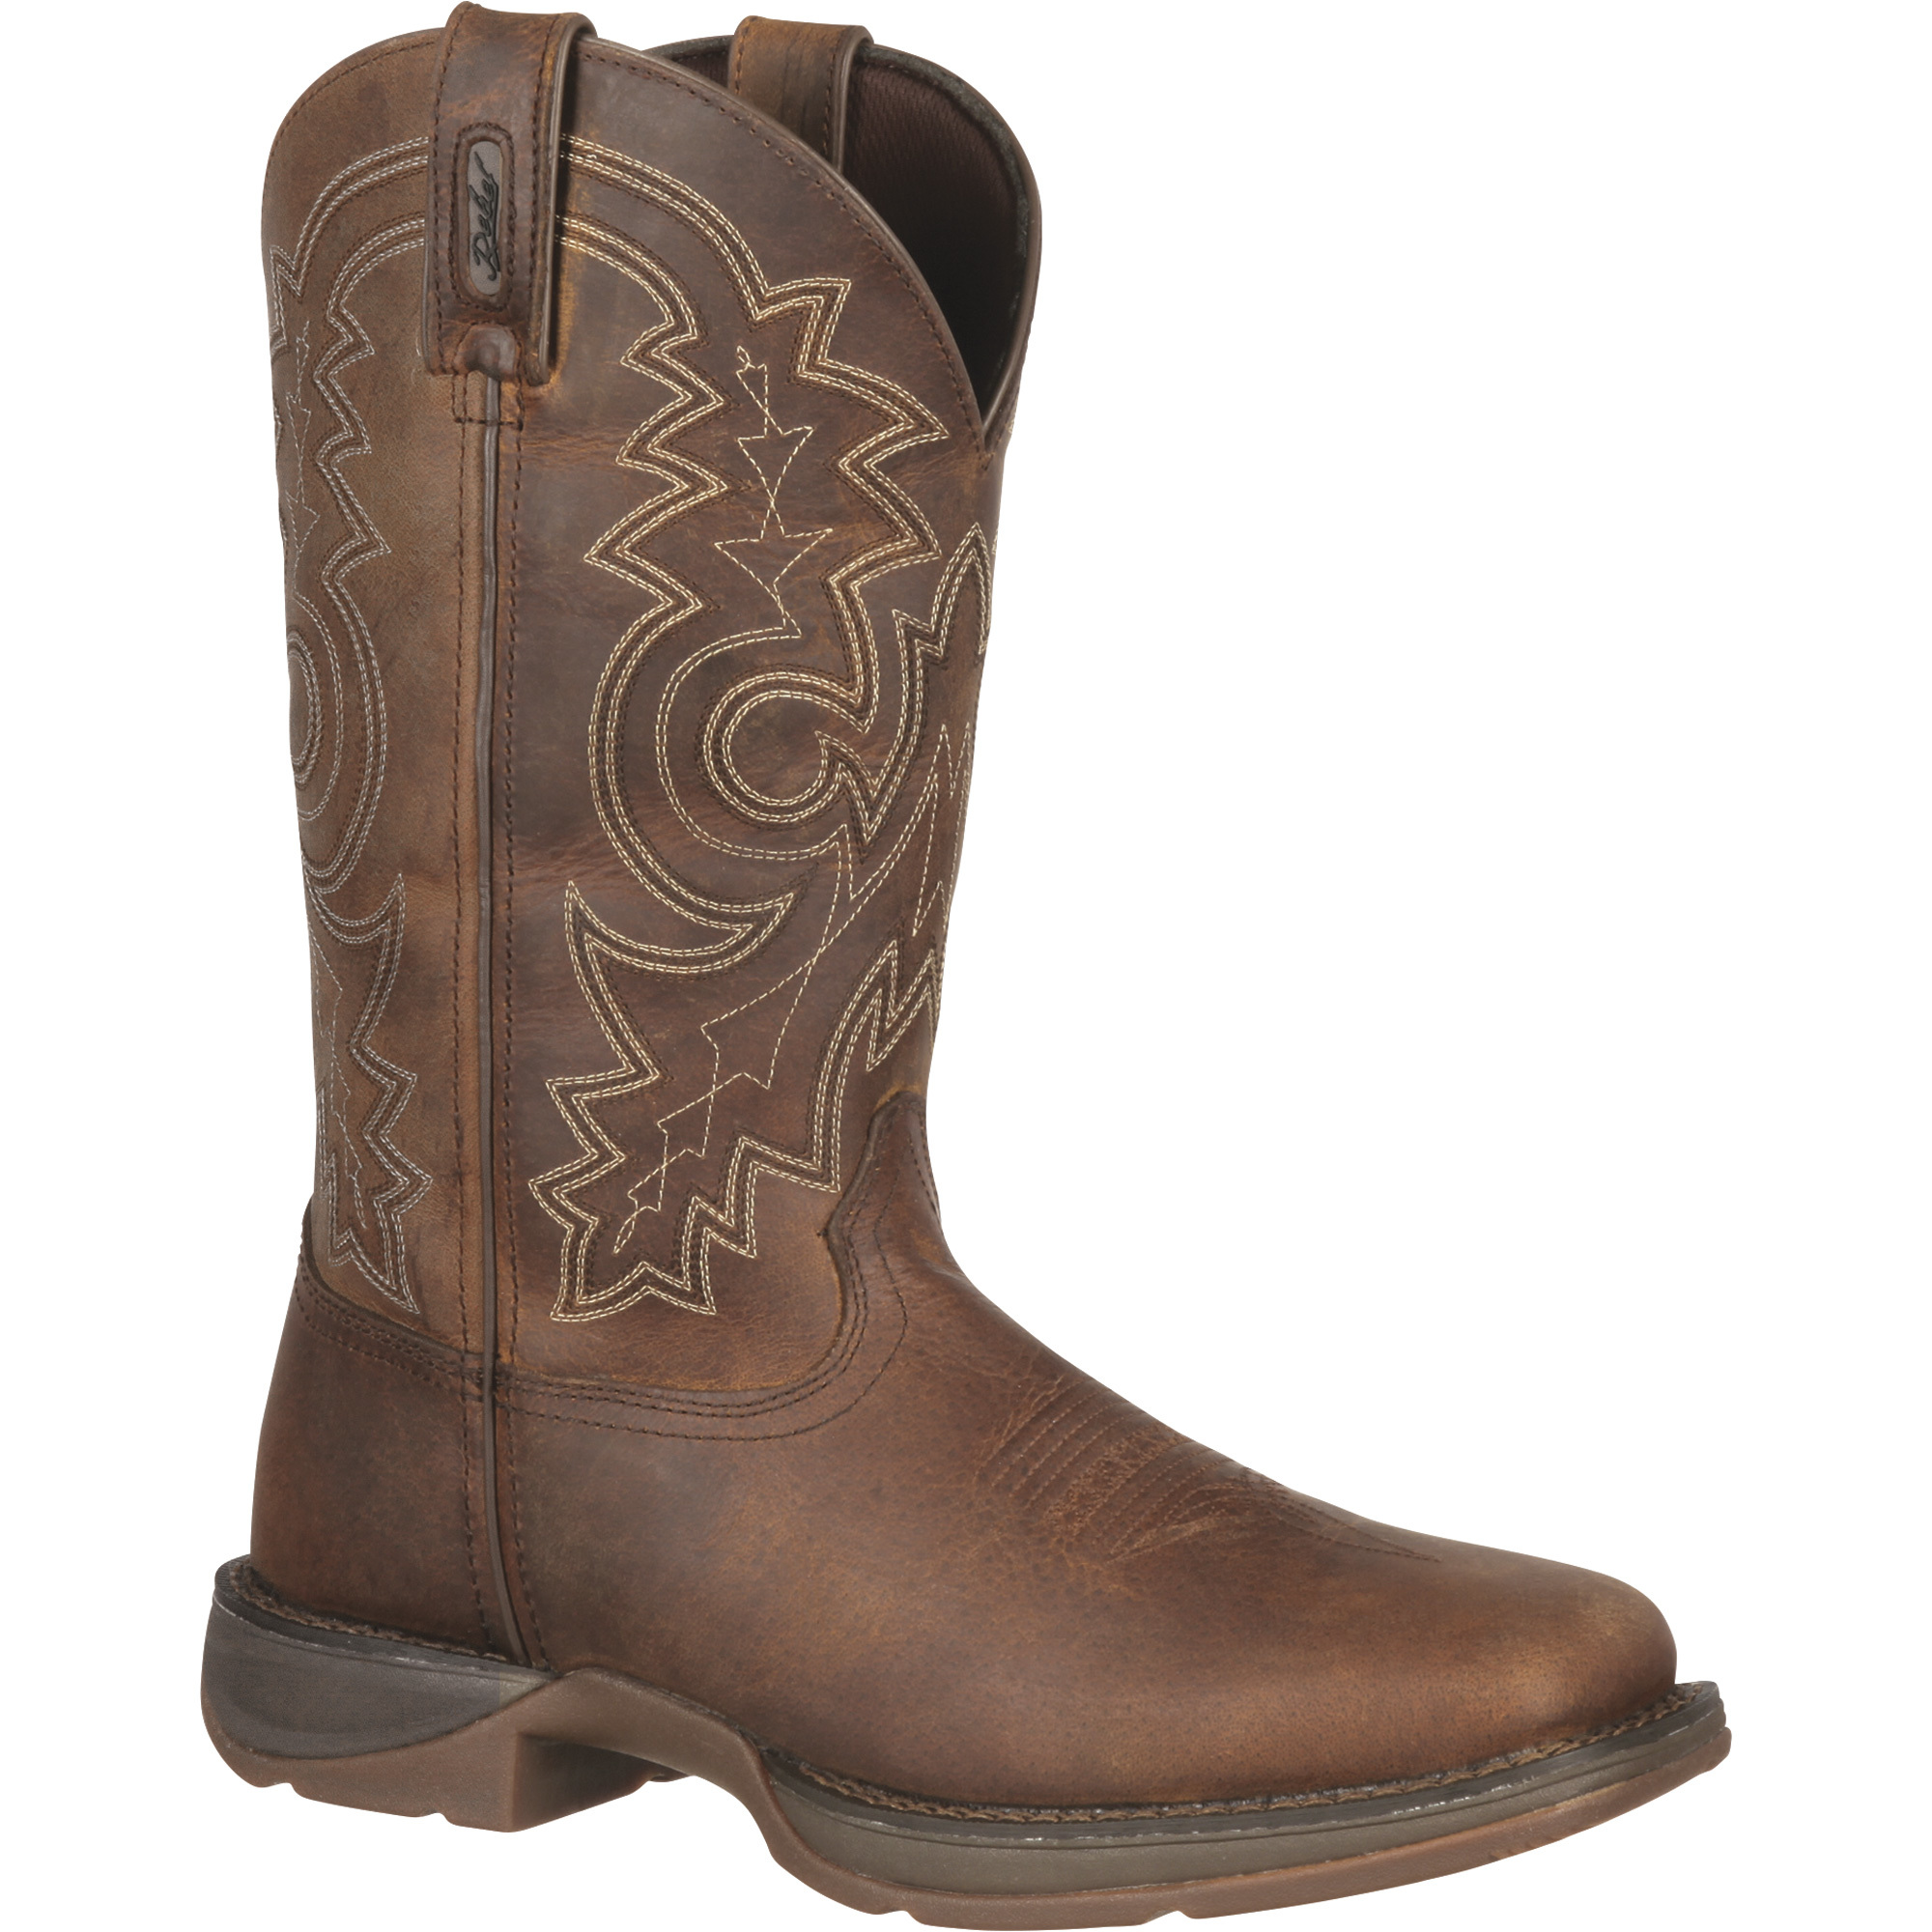 Durango Rebel 11Inch Square-Toe Western Boots - Brown, Size 10 1/2, Model DB4443